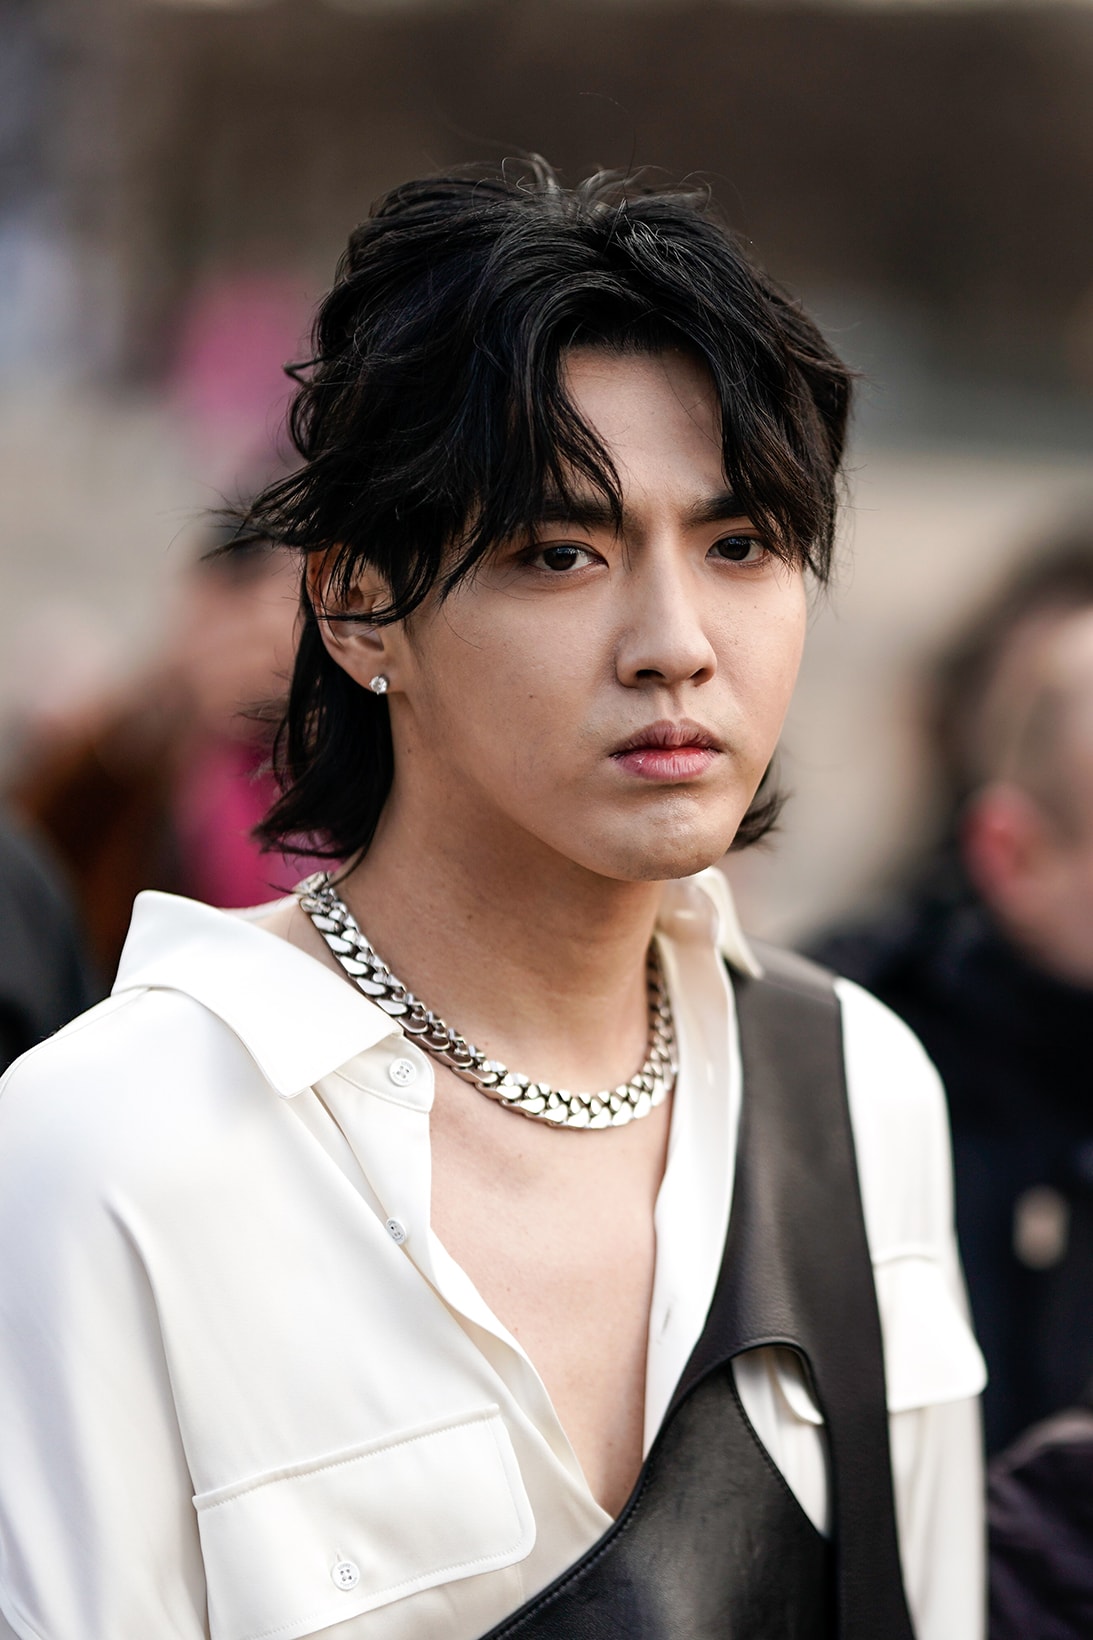 Brands announce termination of contract with pop star Kris Wu over